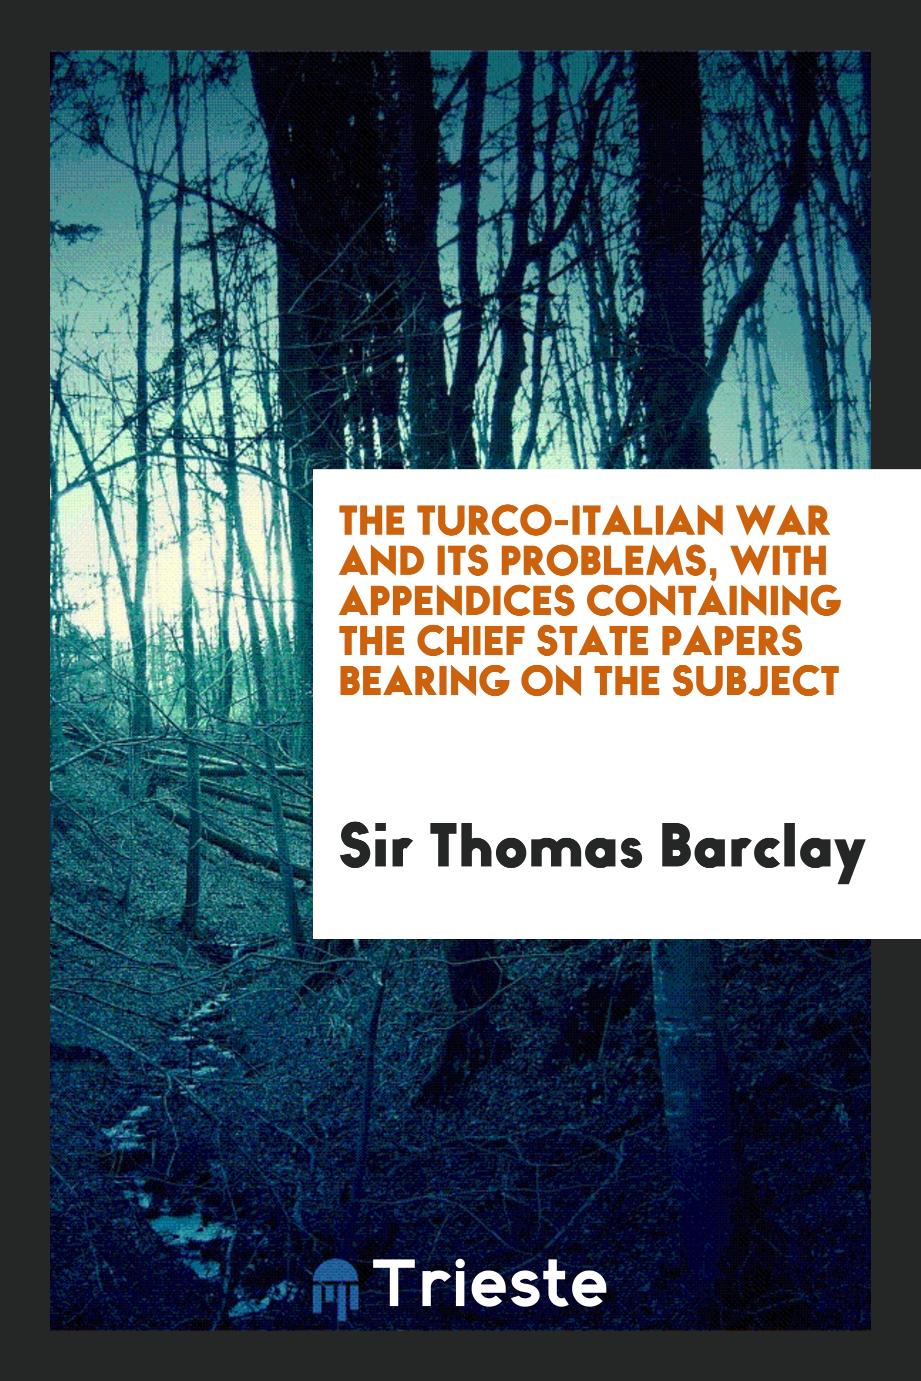 The Turco-Italian War and its problems, with appendices containing the chief state papers bearing on the subject